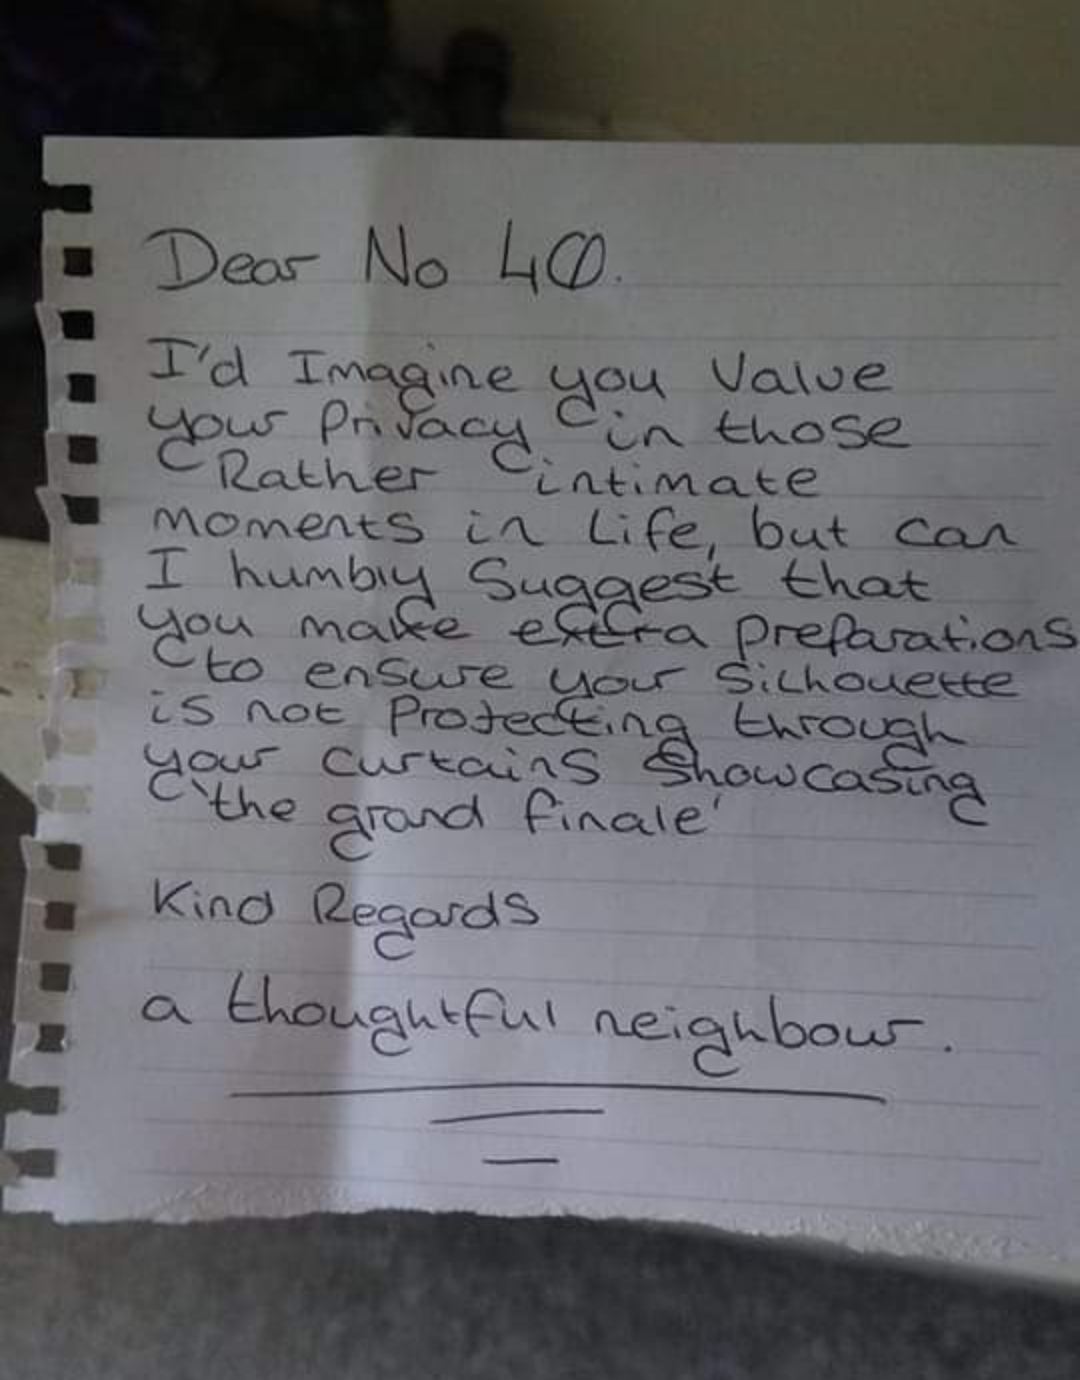 Cool Stuff My friend got this concerned note through her letterbox this morning